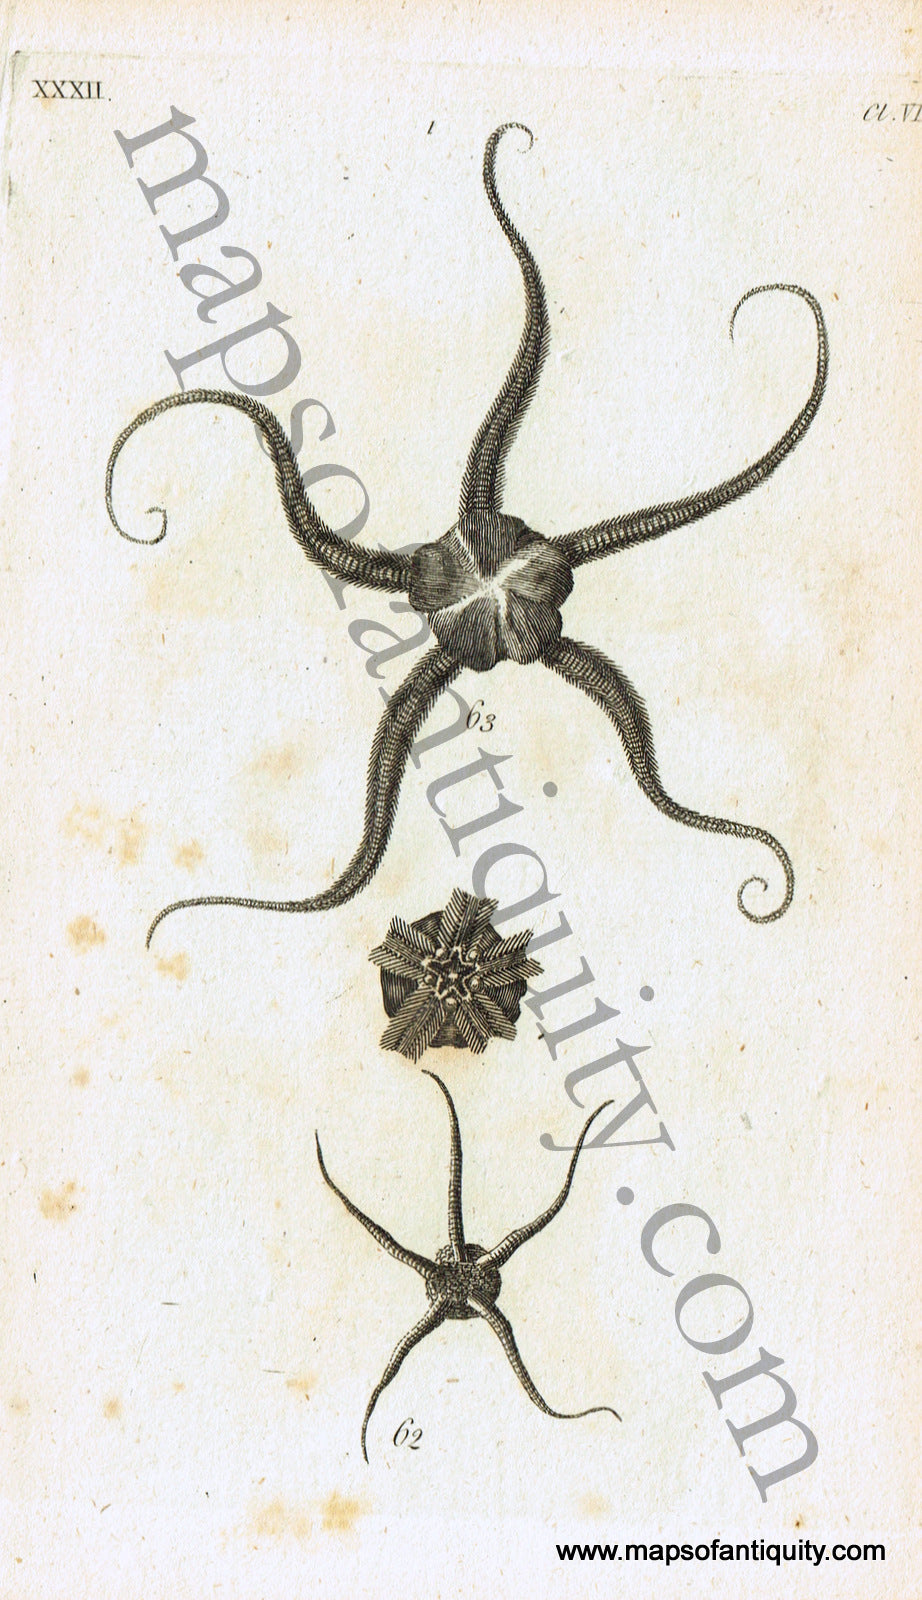 Antique-Black-and-White-Engraved-Illustration-Sea-Stars-Antique-Prints-Natural-History-Sea-Shells-c.-1760--Maps-Of-Antiquity